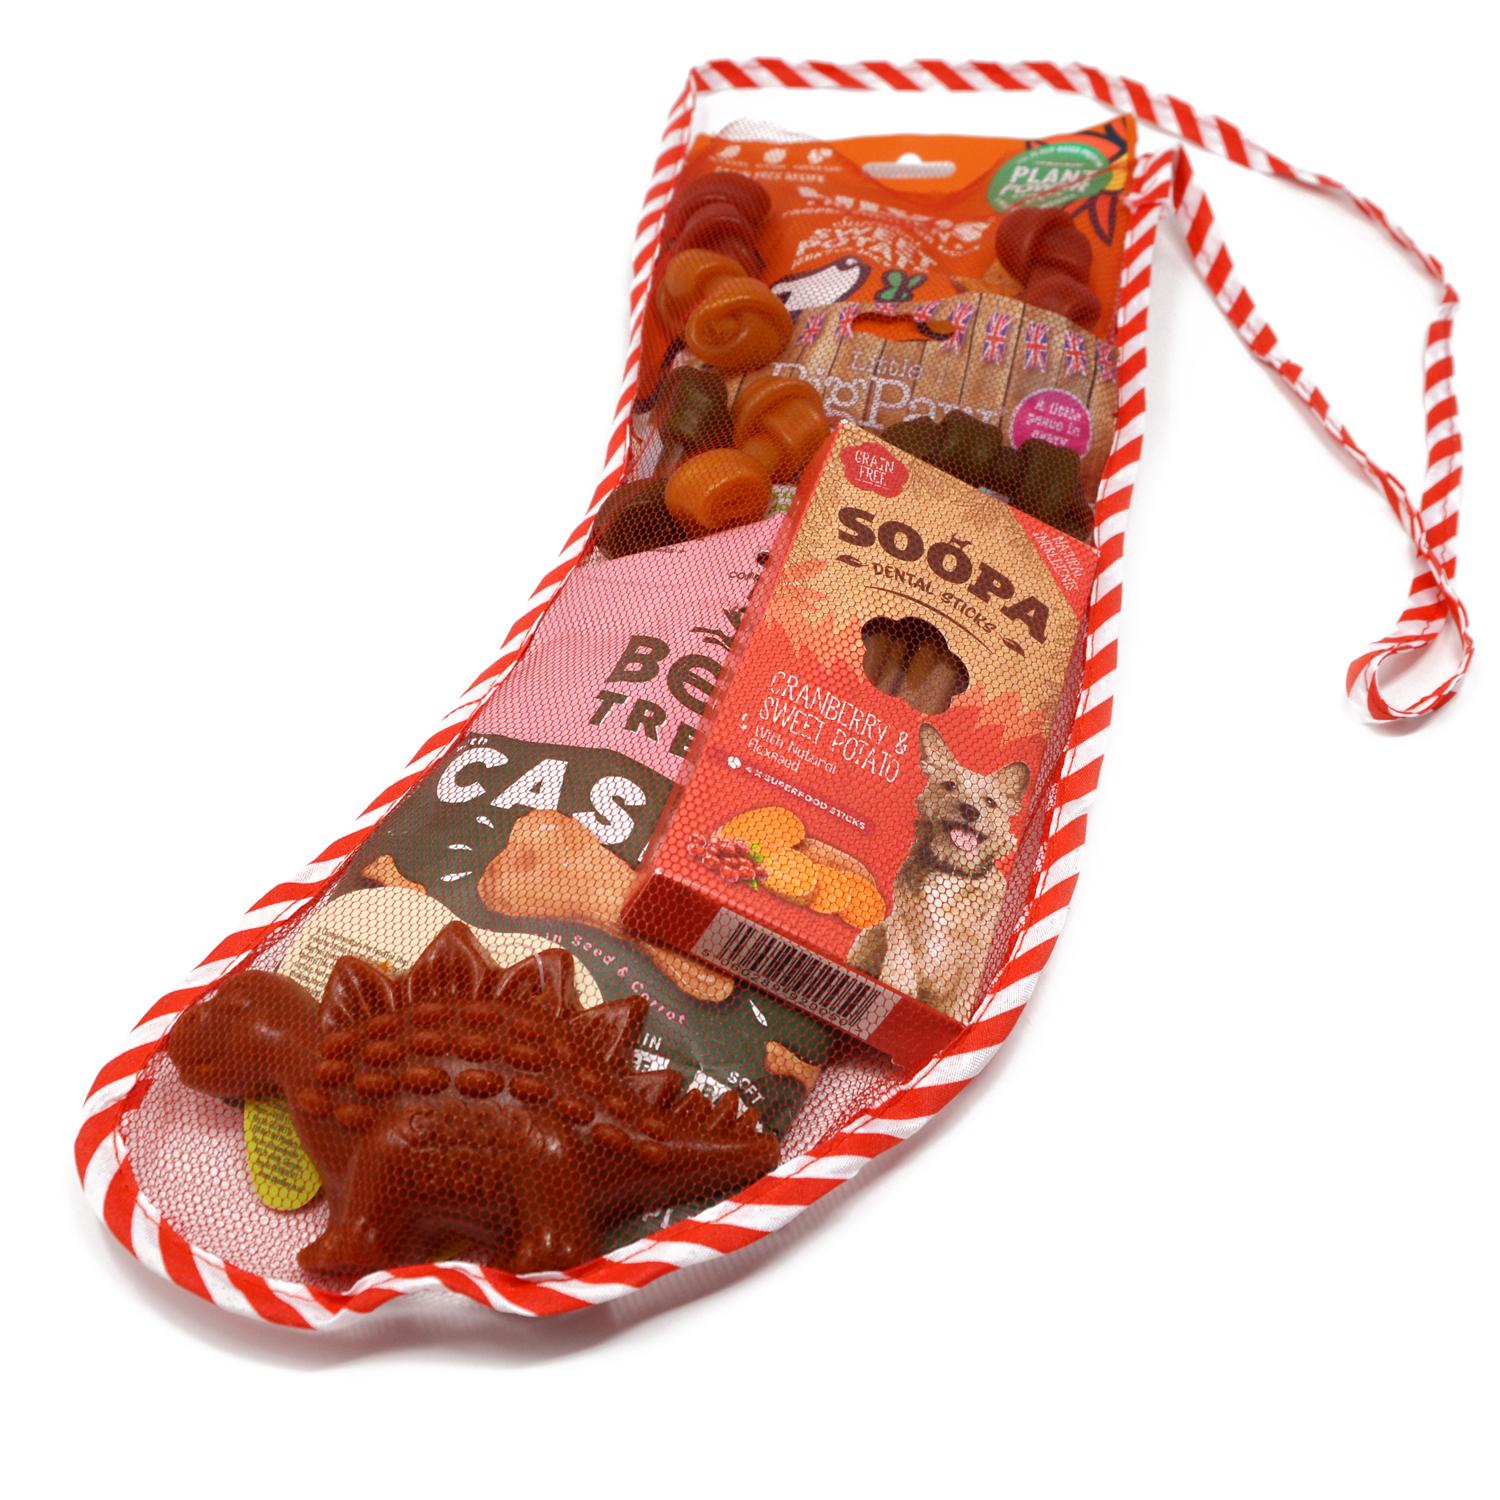 An close up of a Christmas Dog Stocking Filled with plant-based dog treats